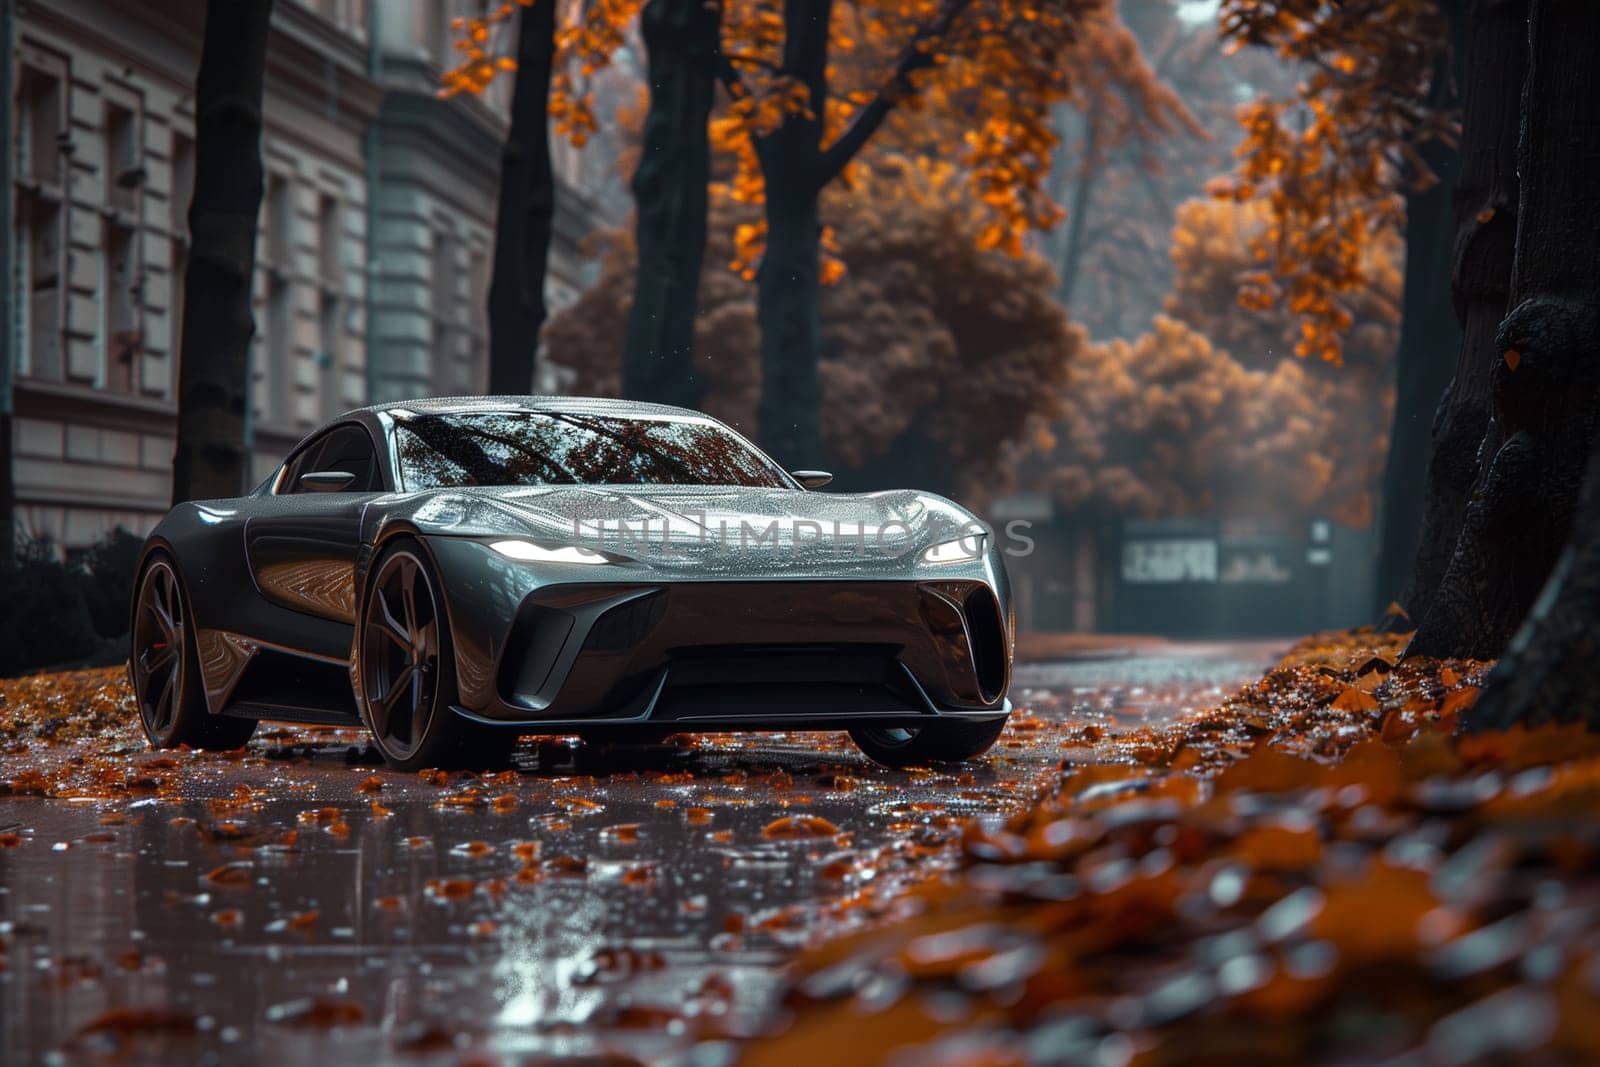 A modern sports car stands out against a backdrop of orange autumn leaves on a wet urban road, hinting at a blend of technology and nature during fall.